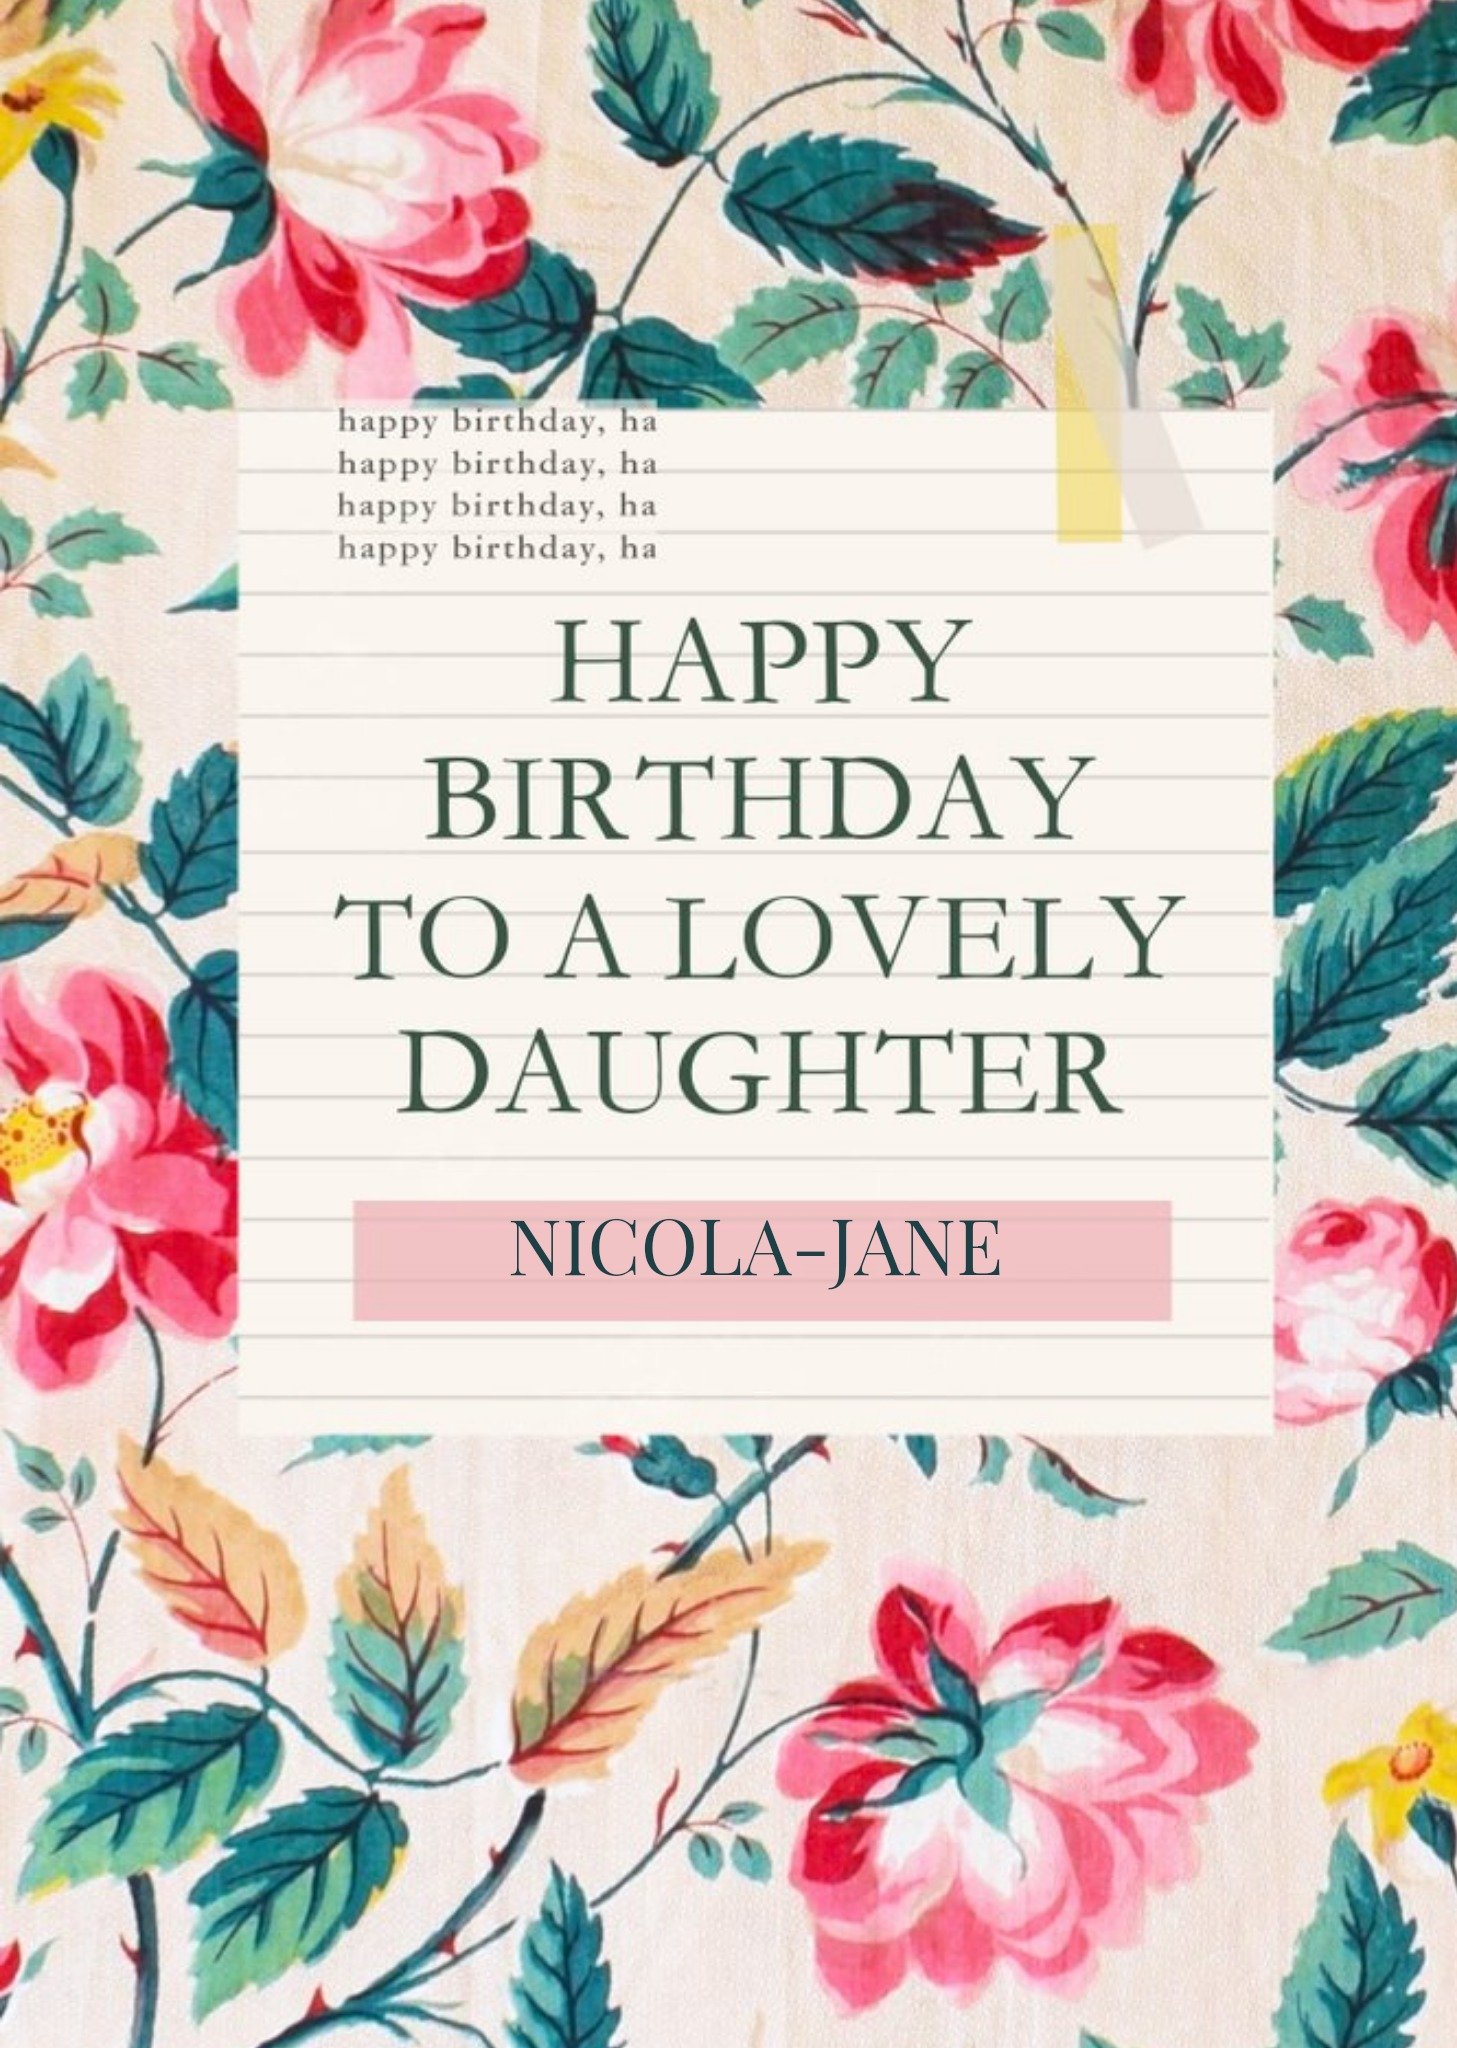 The V&a V&a Fashion And Textiles Collection Lovely Daughter Floral Birthday Card Ecard